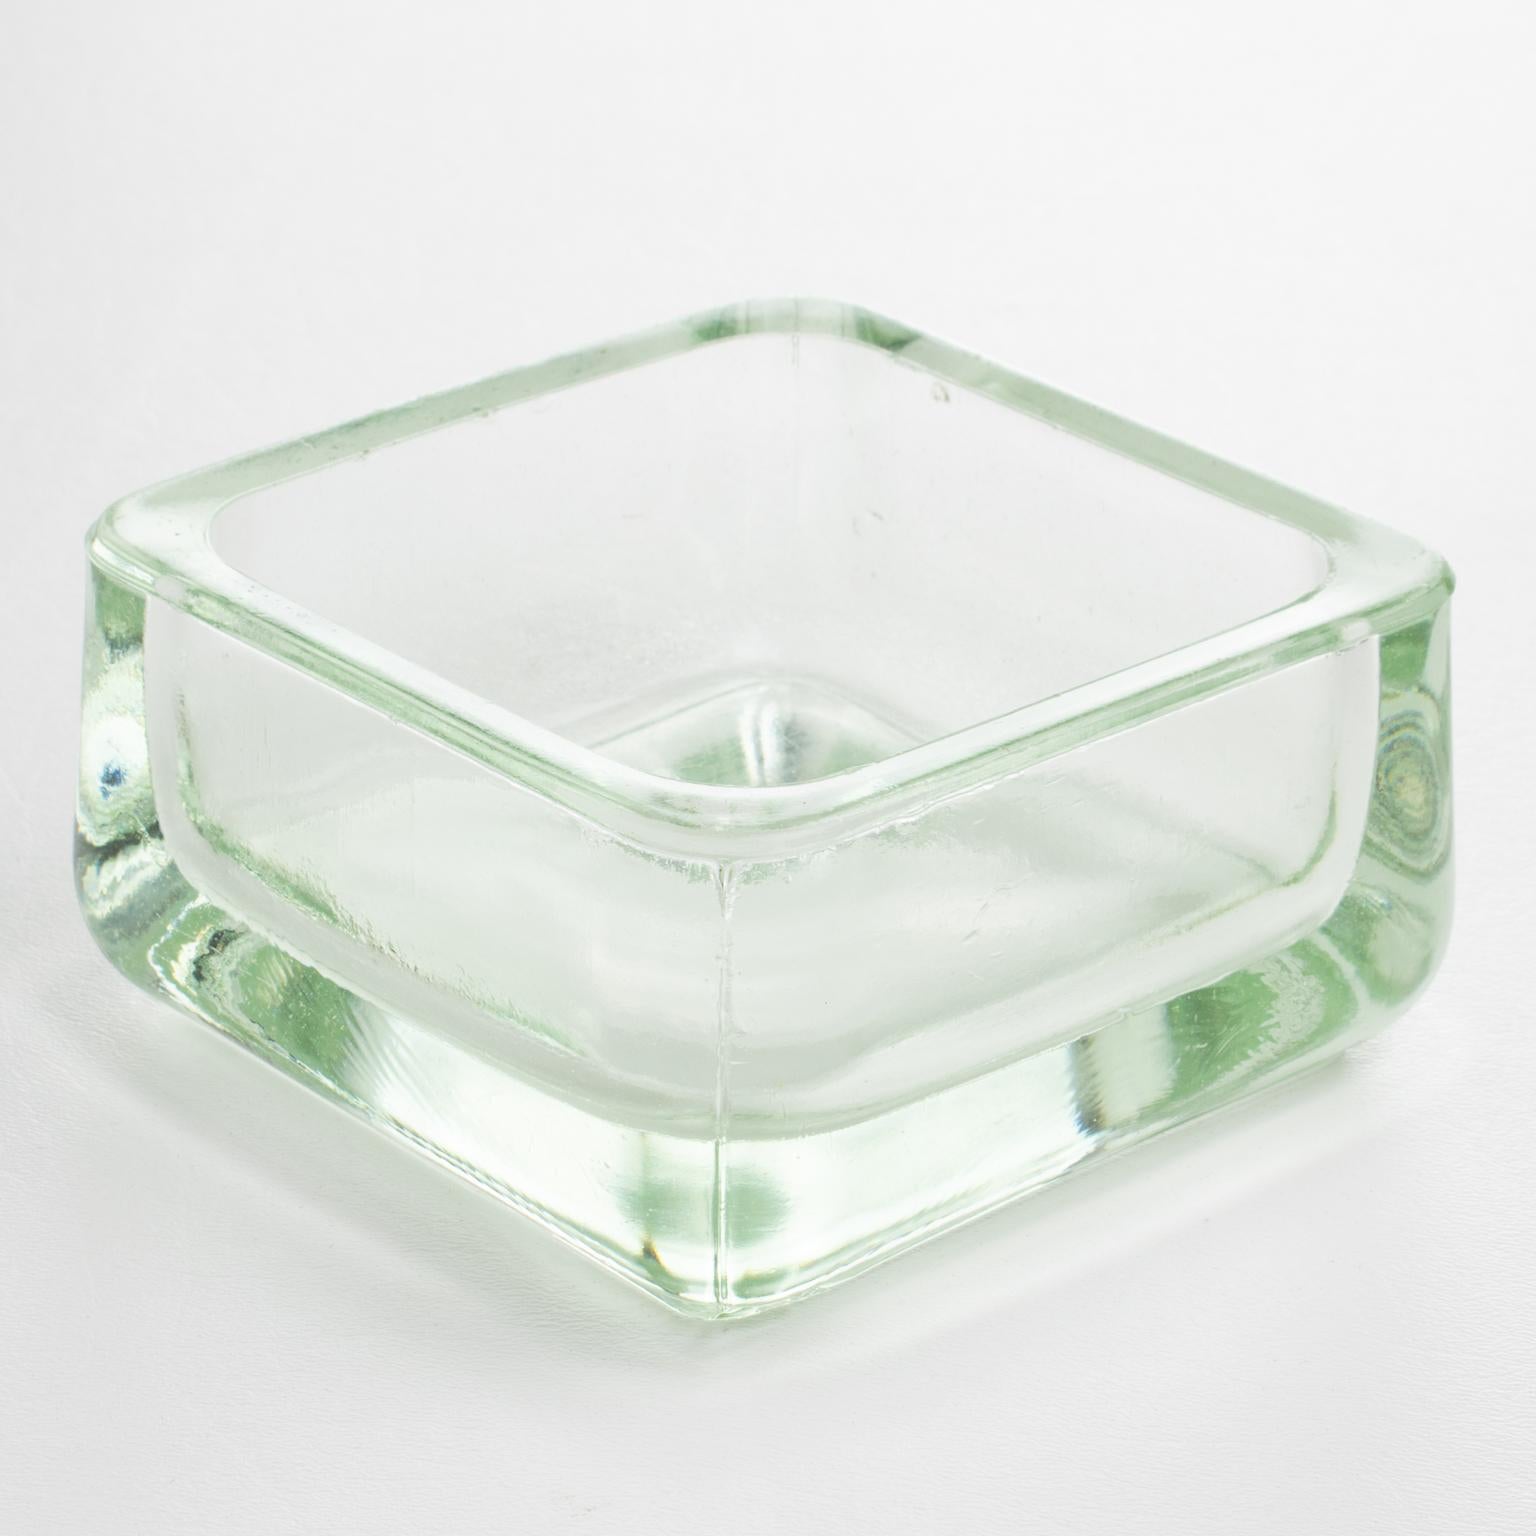 To enhance the style of your modern interior, Lumax, France, crafted this superb molded glass office accessory in the 1950s upon a design by Le Corbusier. This versatile industrial-oriented piece can serve as an ashtray, catch-all, or vide poche,